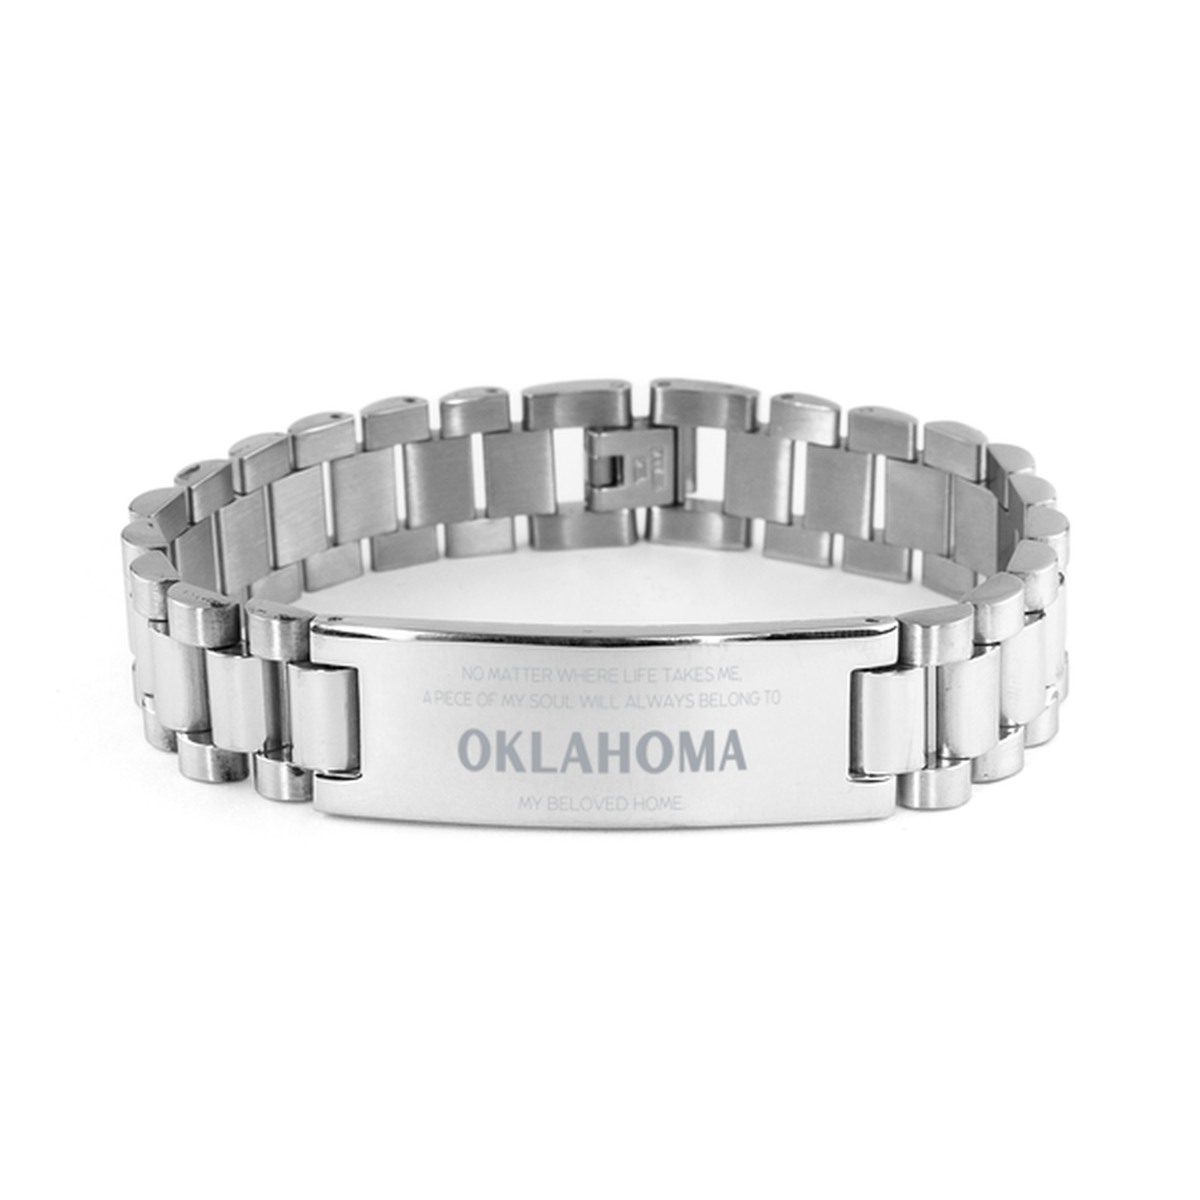 Love Oklahoma State Gifts, My soul will always belong to Oklahoma, Proud Ladder Stainless Steel Bracelet, Birthday Unique Gifts For Oklahoma Men, Women, Friends